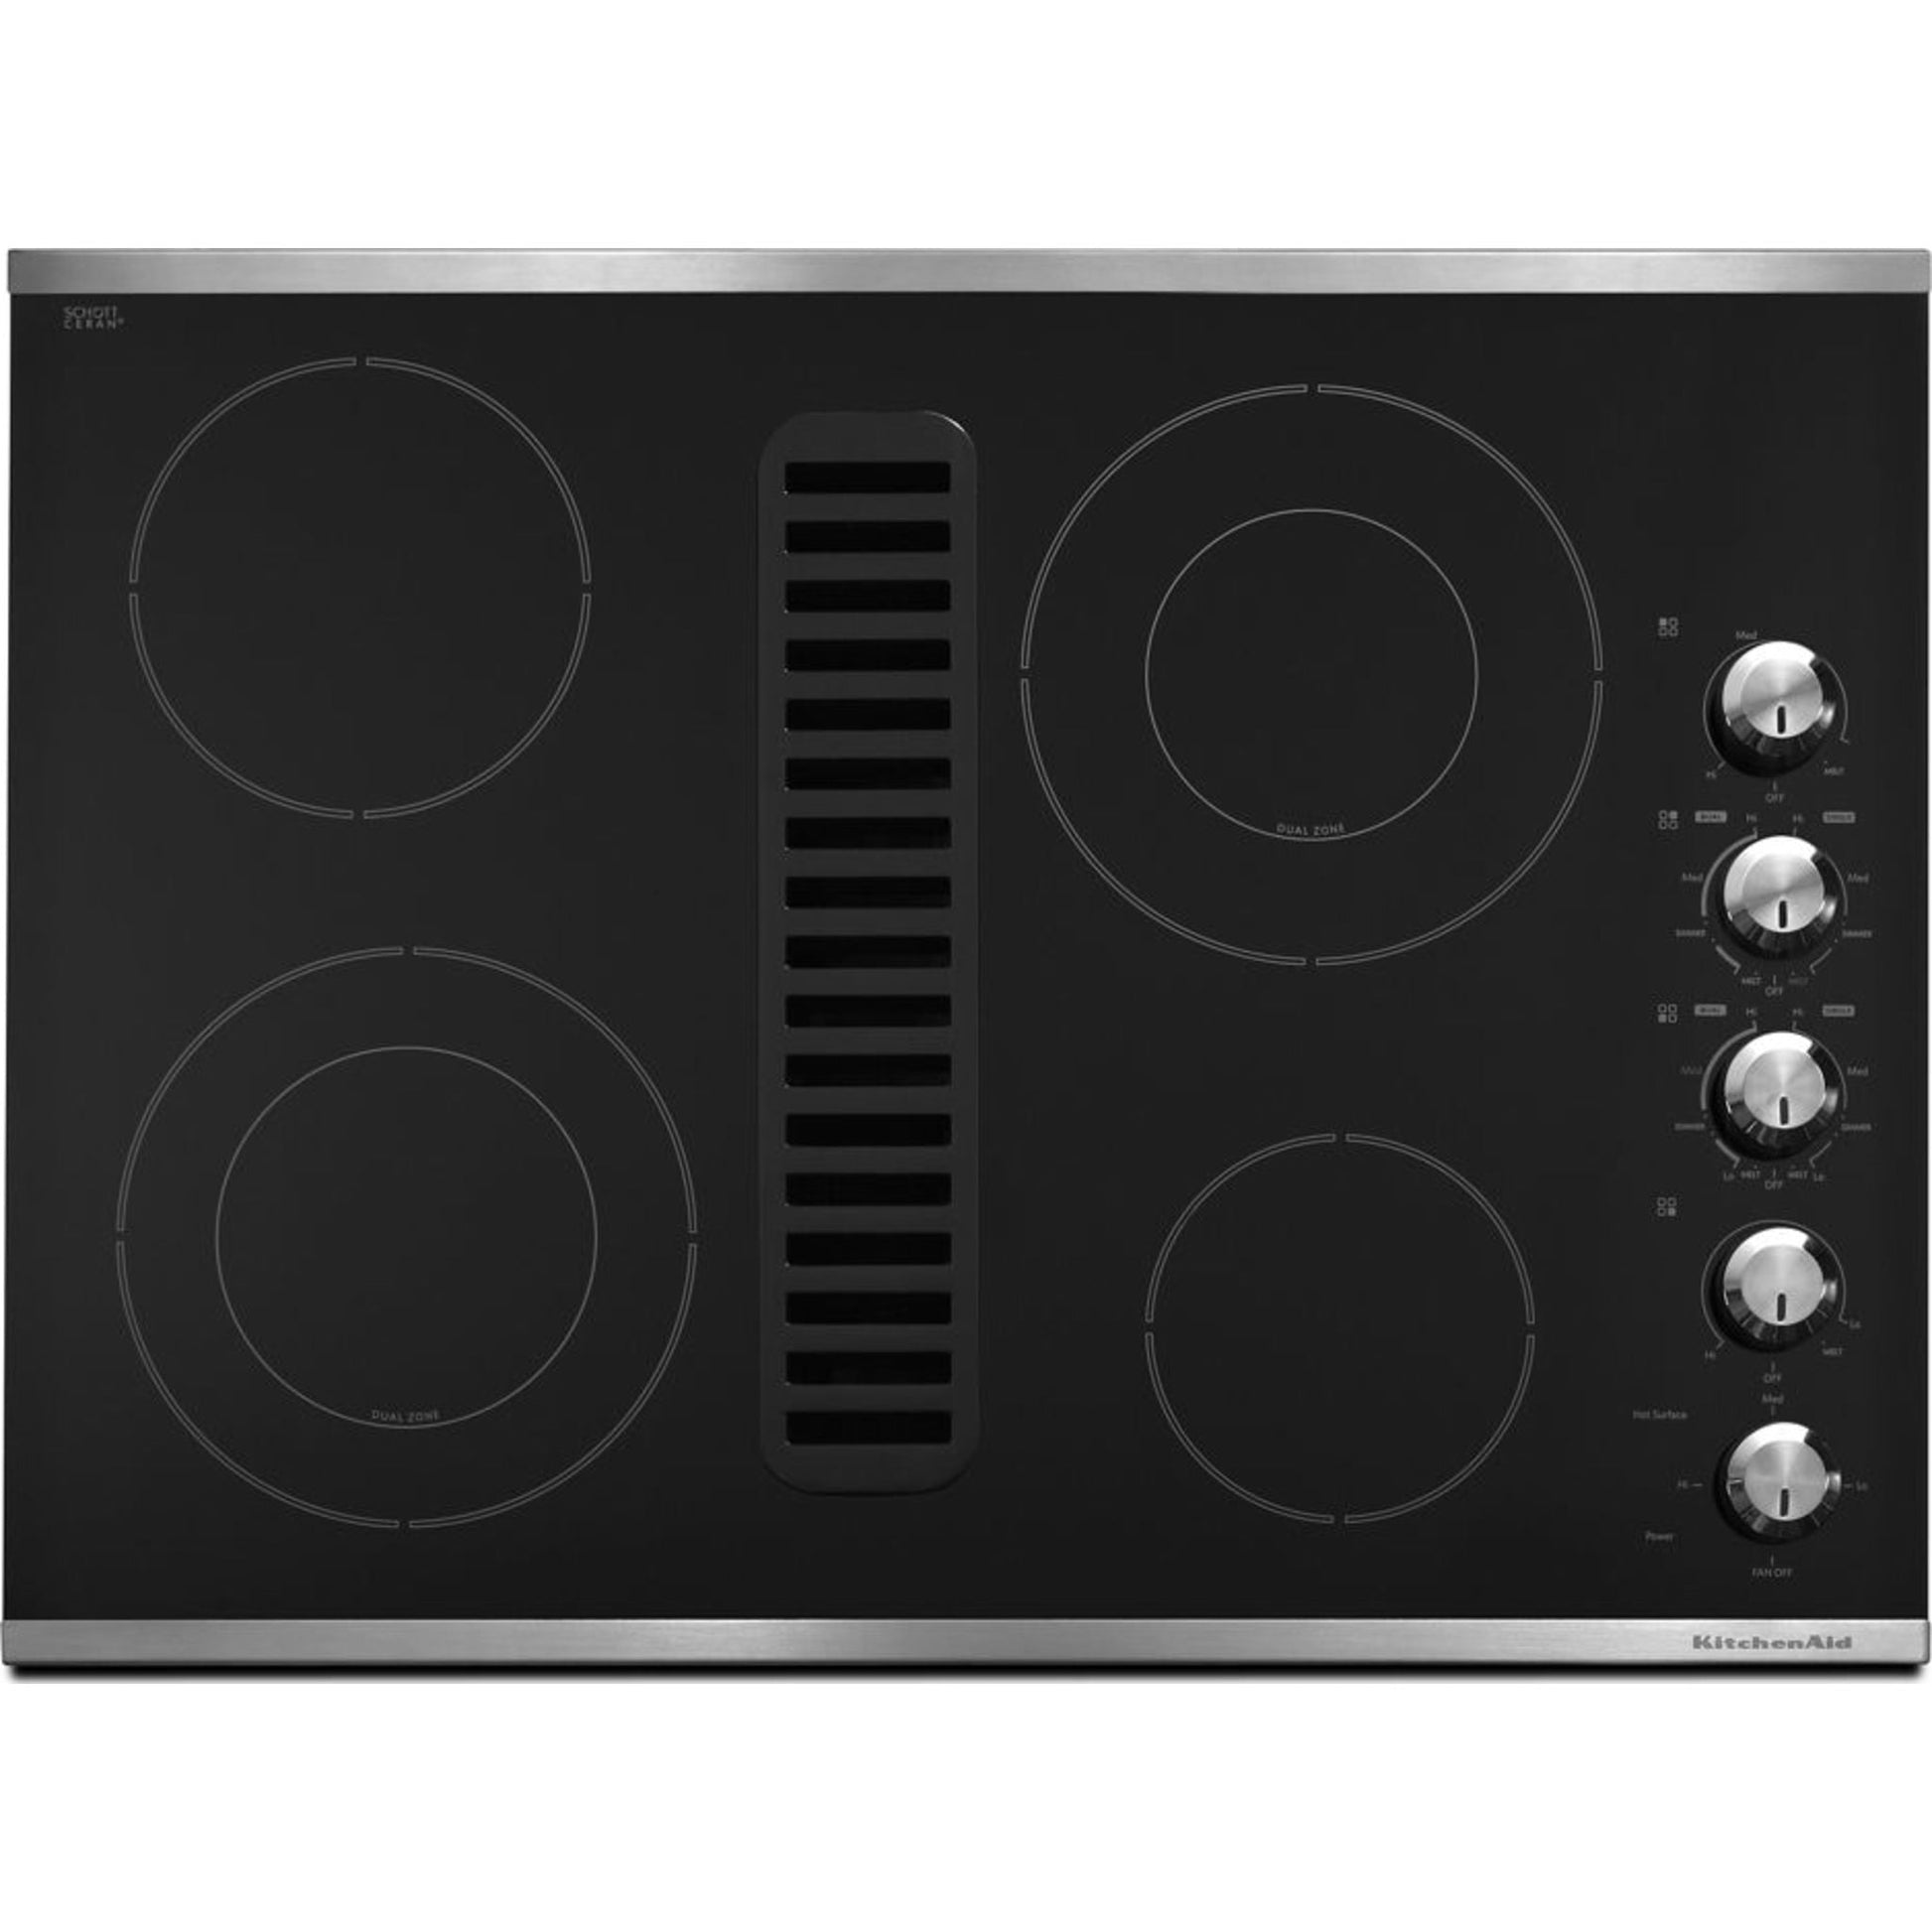 KitchenAid 30" Cooktop (KCED600GSS) - Stainless Steel